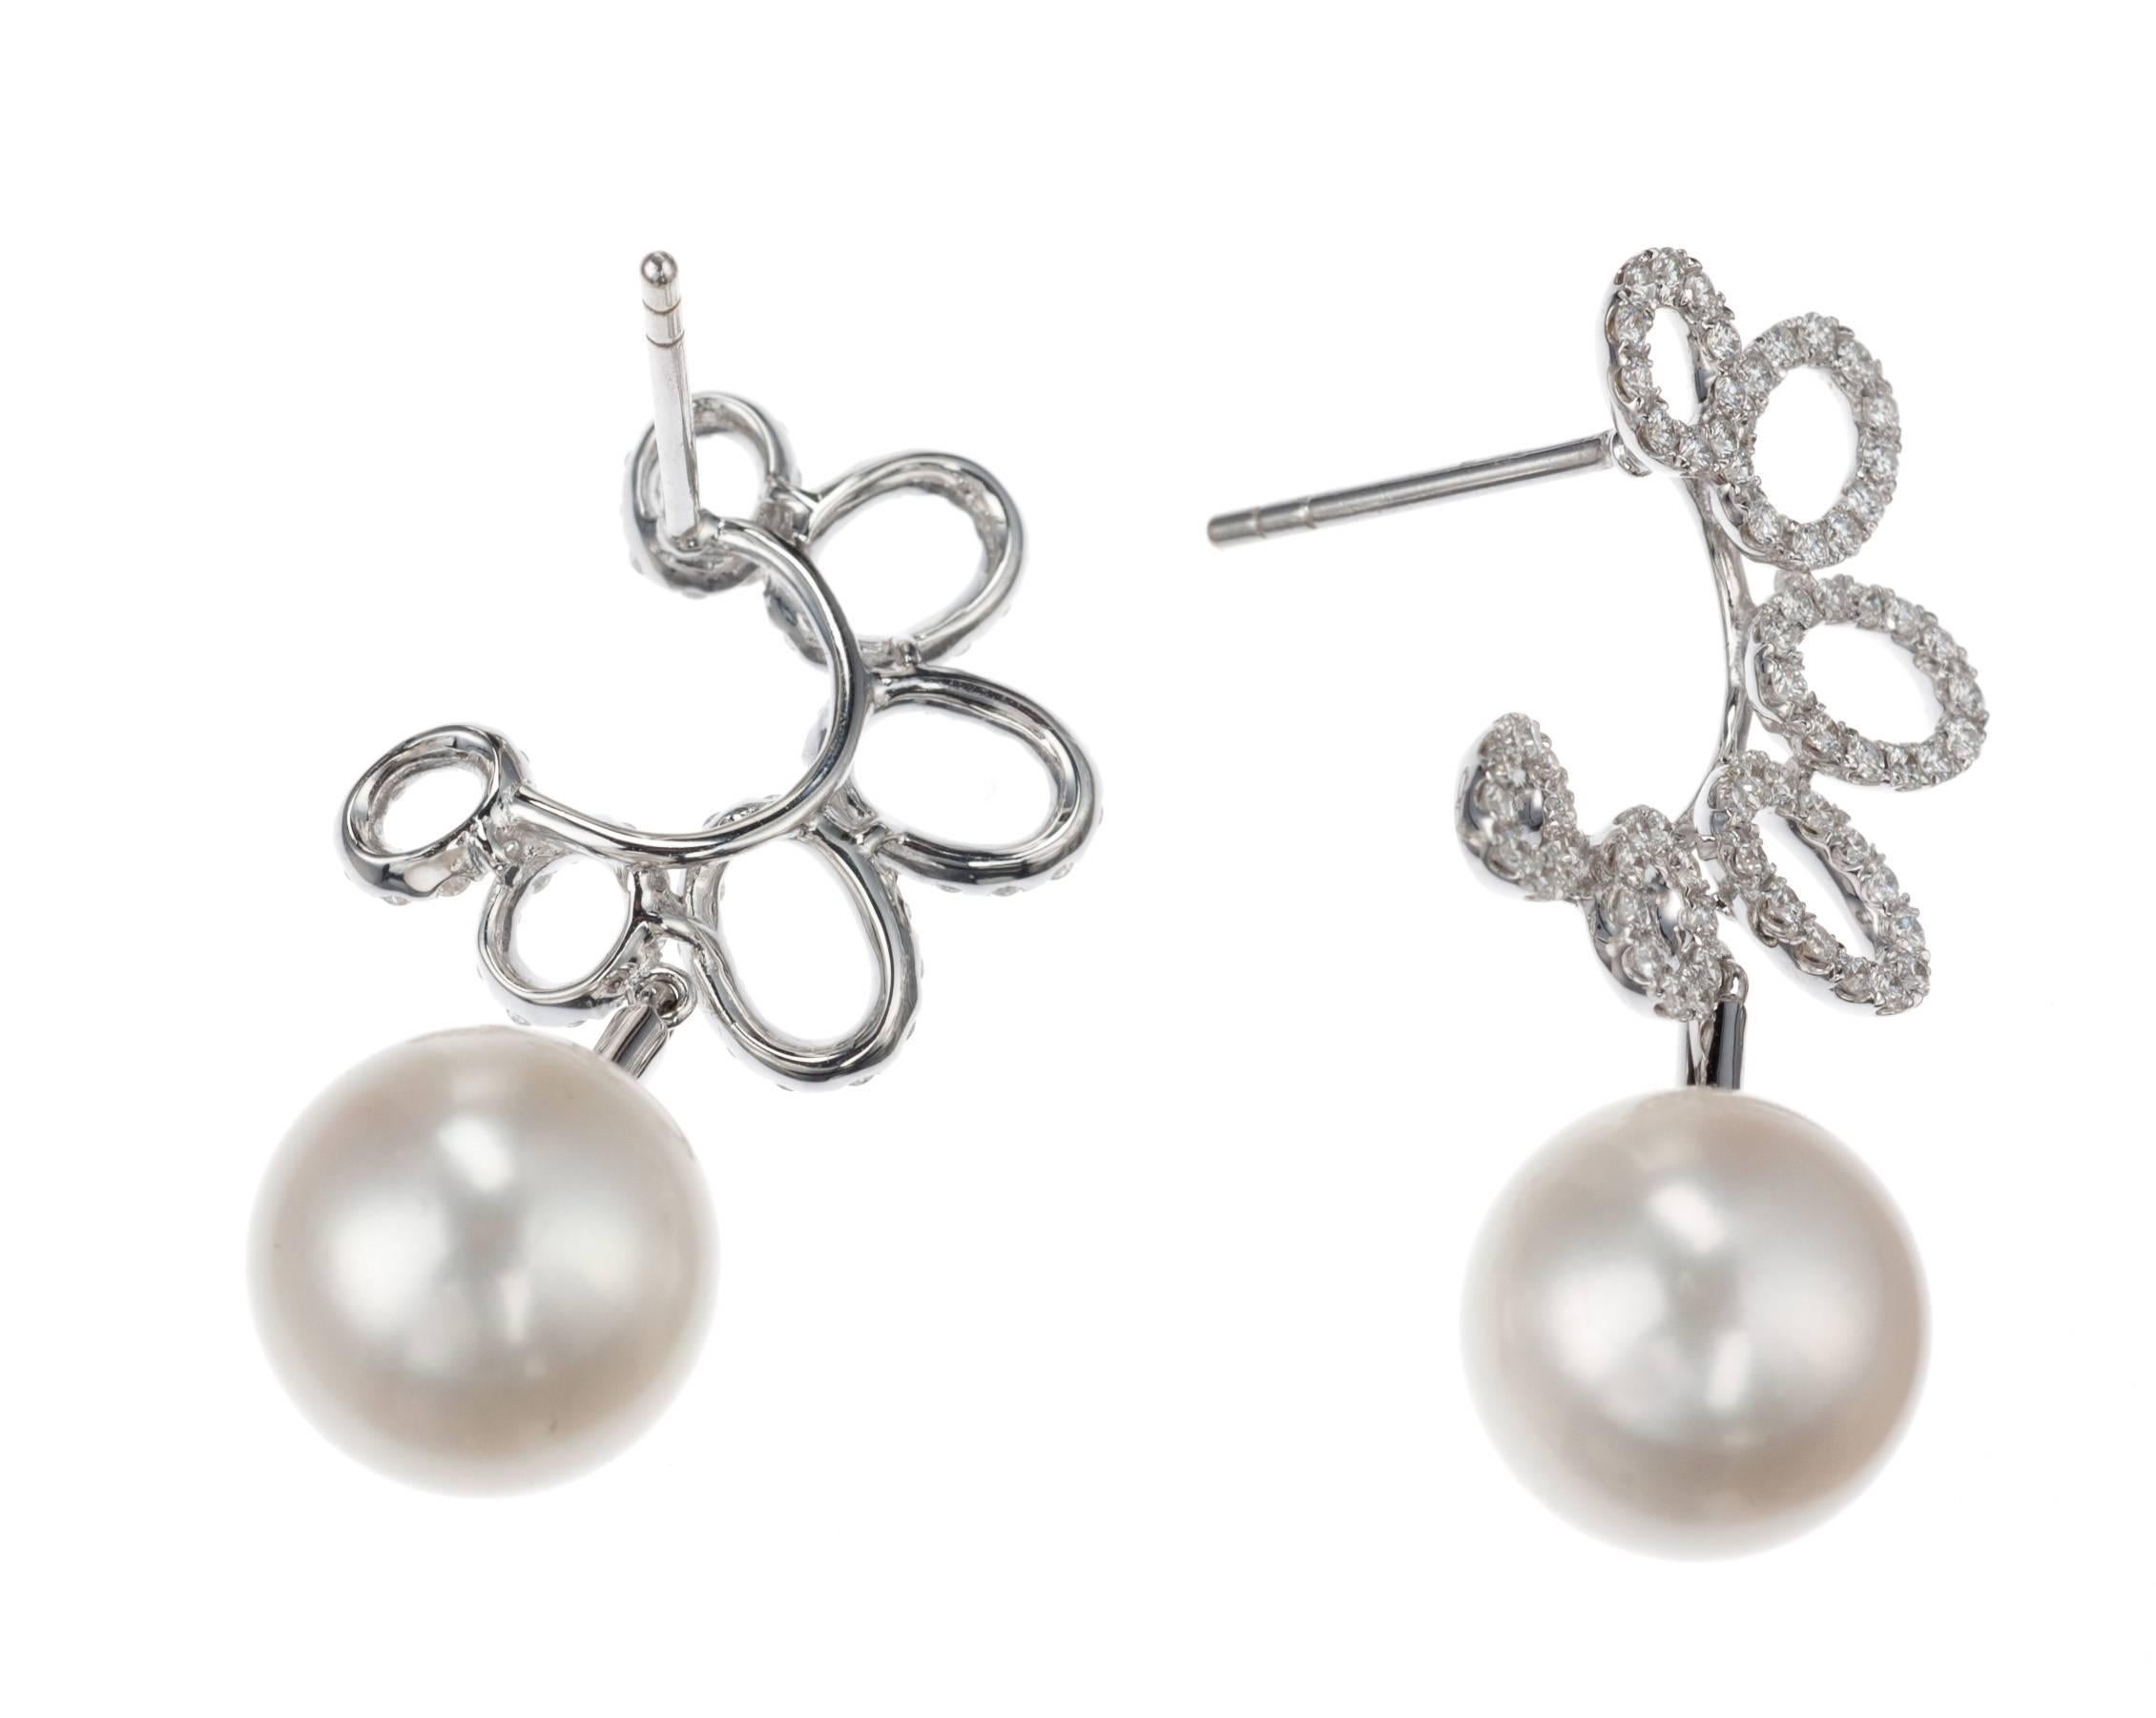 A pair of drop pearl earrings in 18-karat white gold from German designer Schoeffel. Its gentle crescents made from playful ovals lend these earrings a youthfulness and modern flair uncommon to pearls. The freshwater cultured pearls, 10-11mm, are